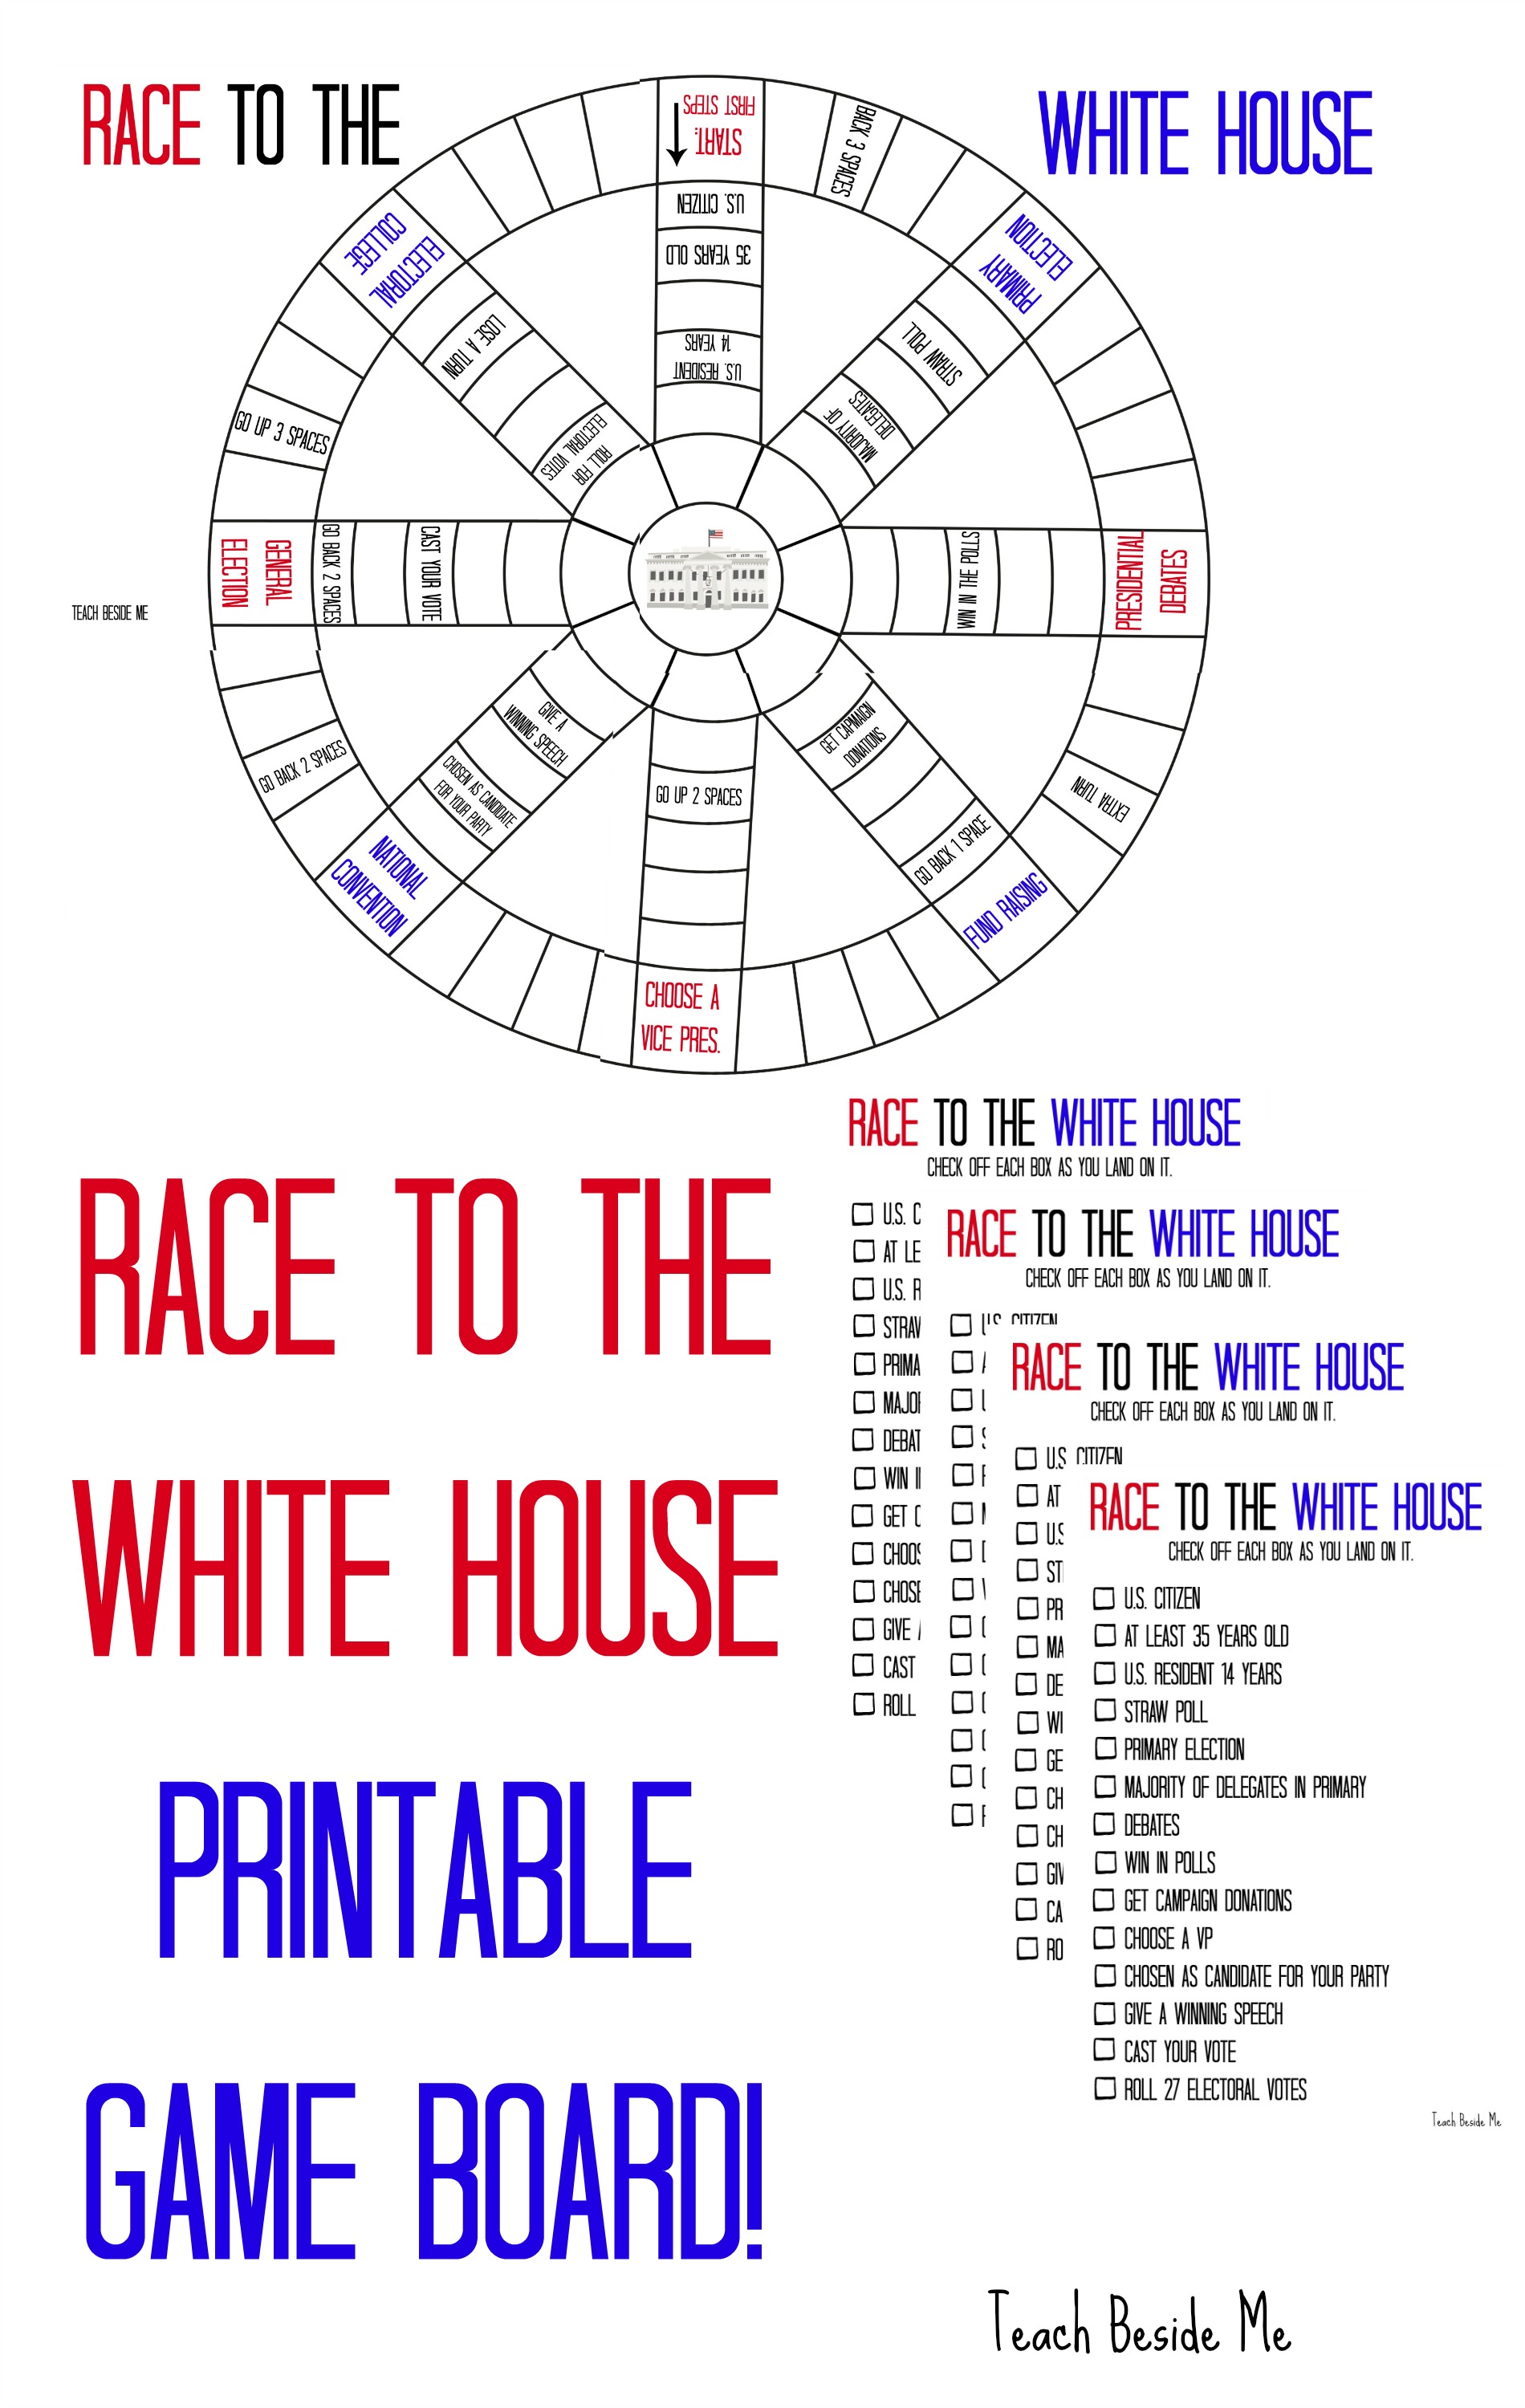 Race to the White House Bipartisan Games